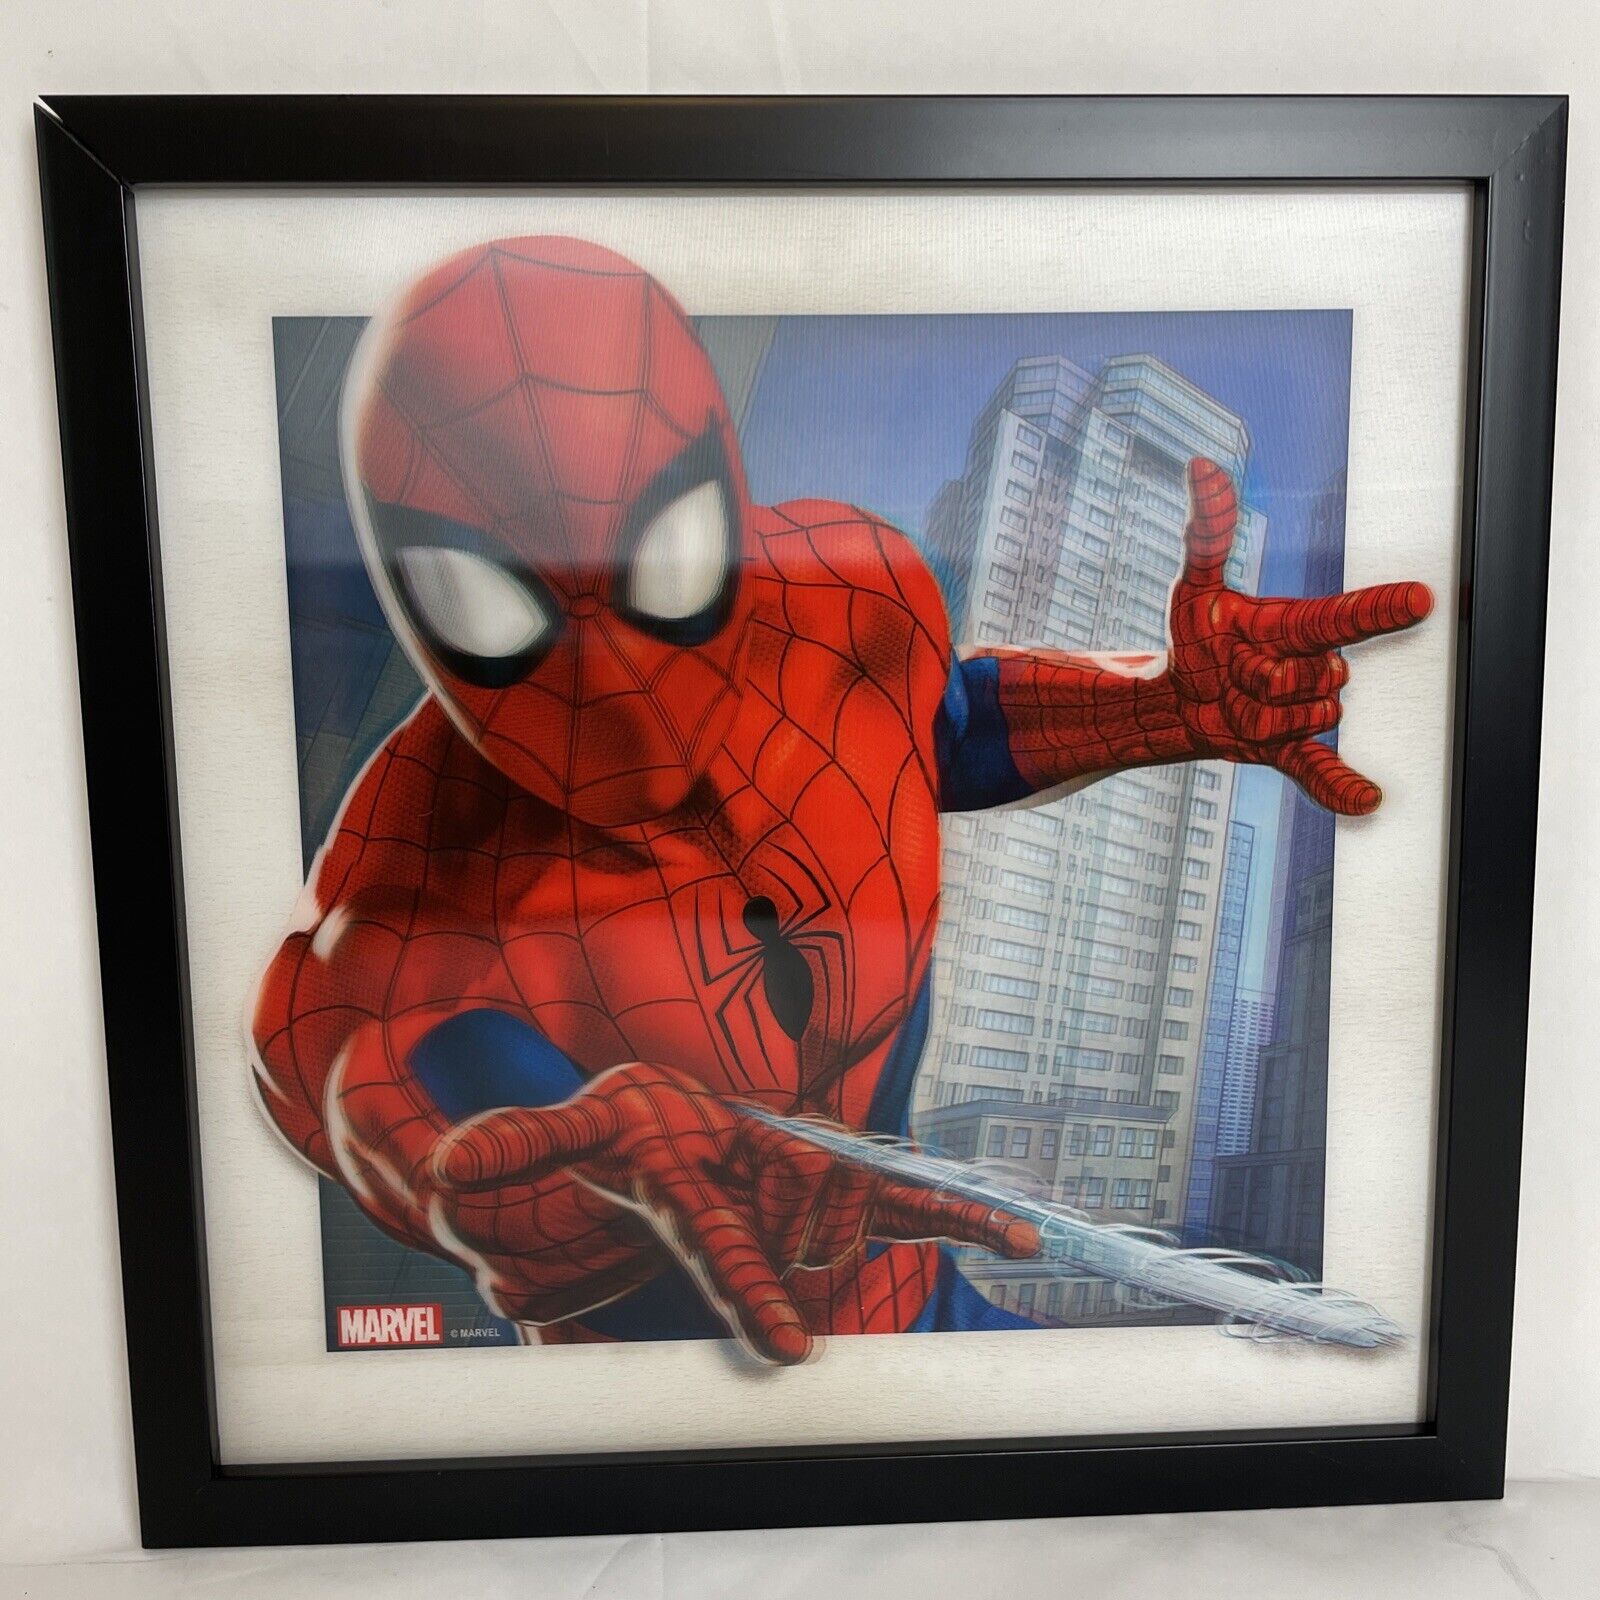 SPIDER-MAN 3-D Ventricular FRAMED PICTURE  14" X 14"  BRAND NEW